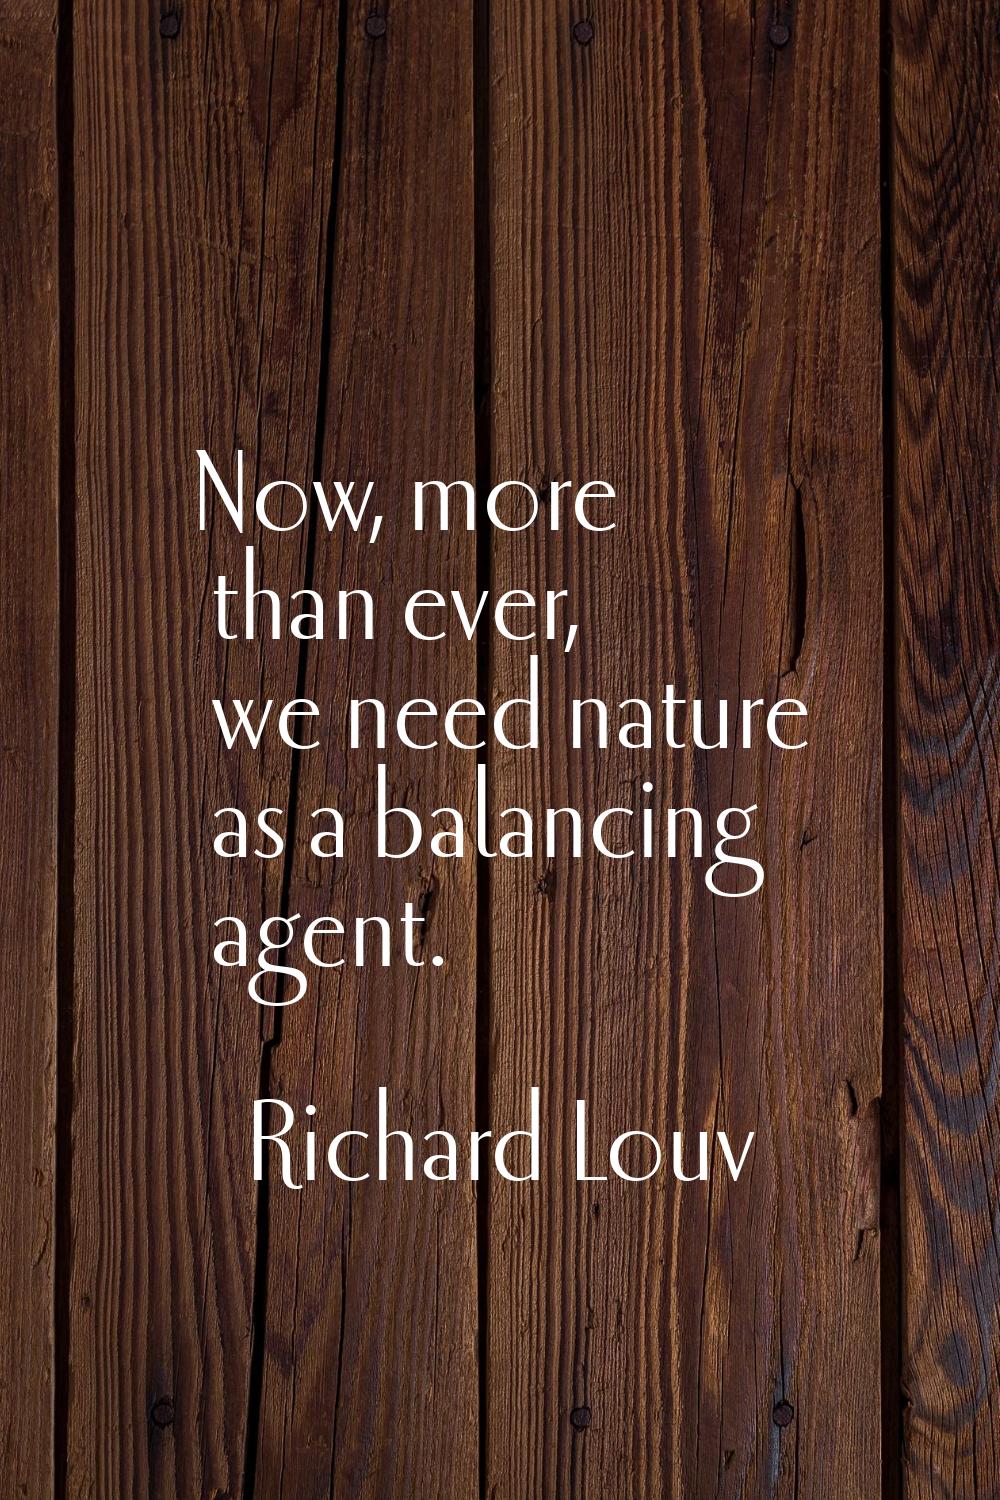 Now, more than ever, we need nature as a balancing agent.